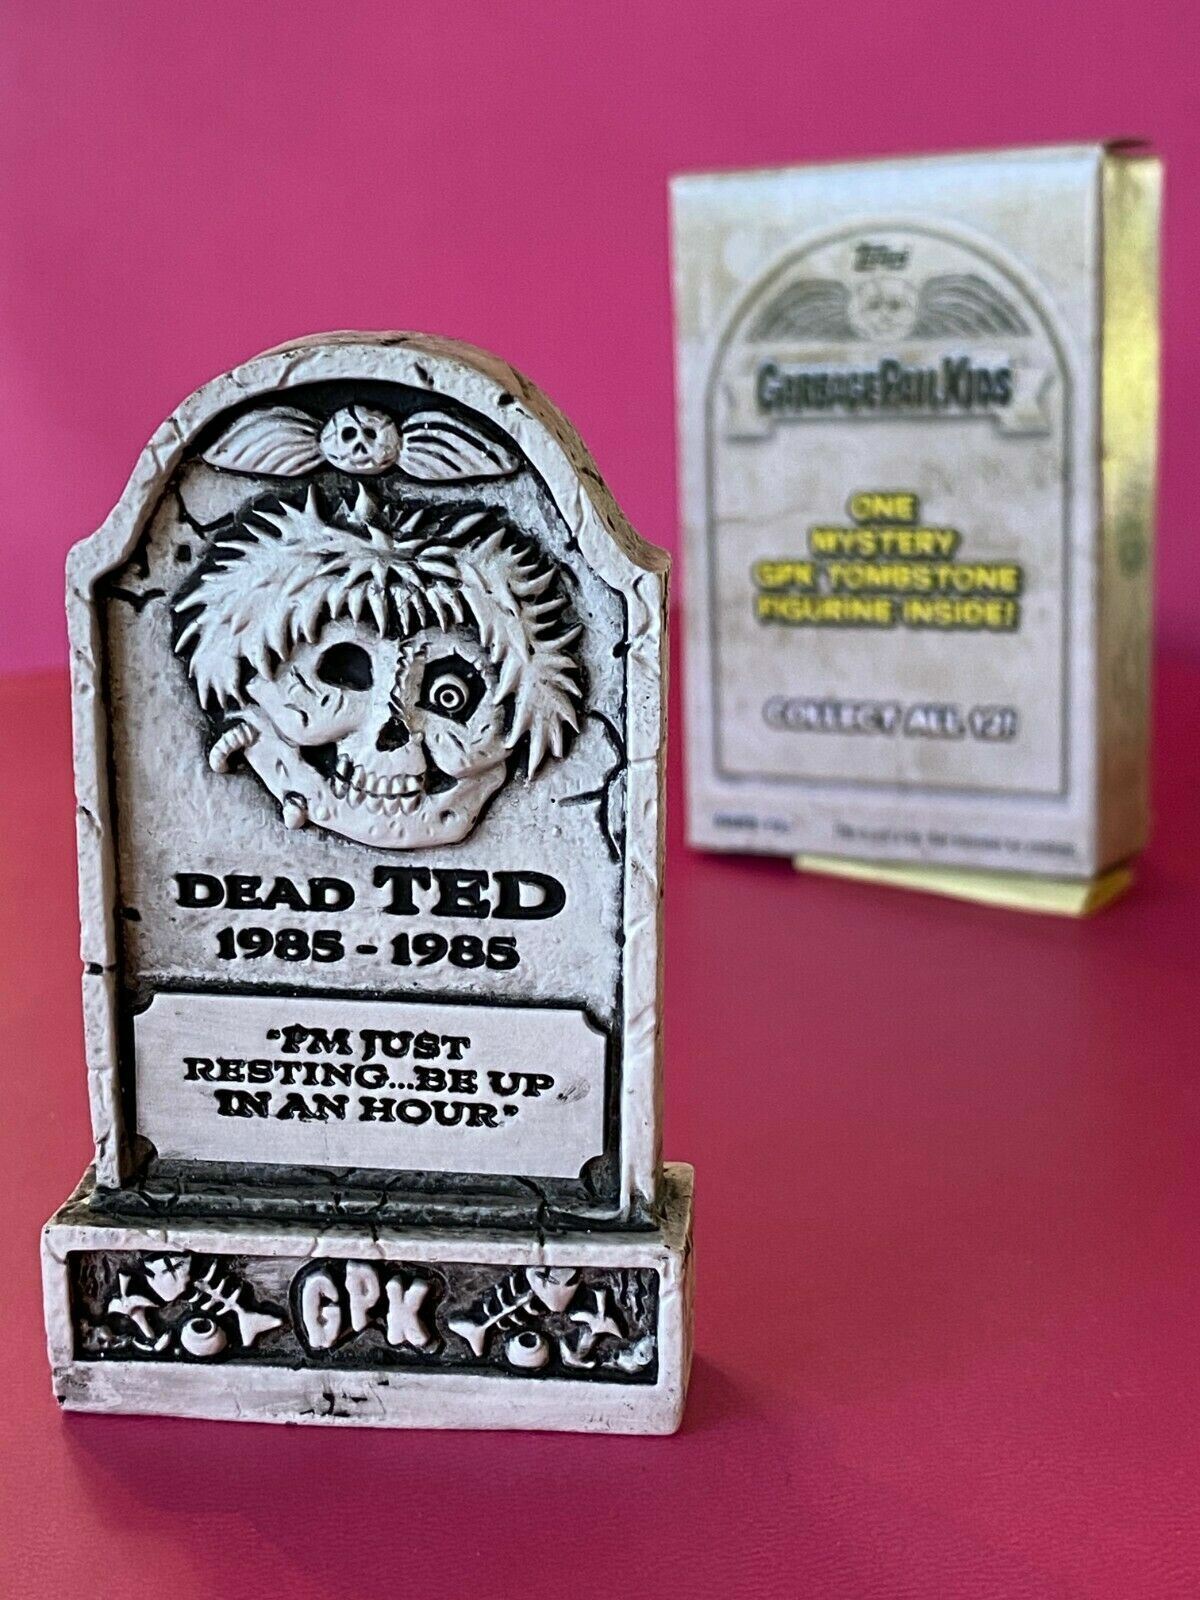 2019 Garbage Pail Kids Revenge, Oh the Horror-ible DEAD TED Tombstone jay decay